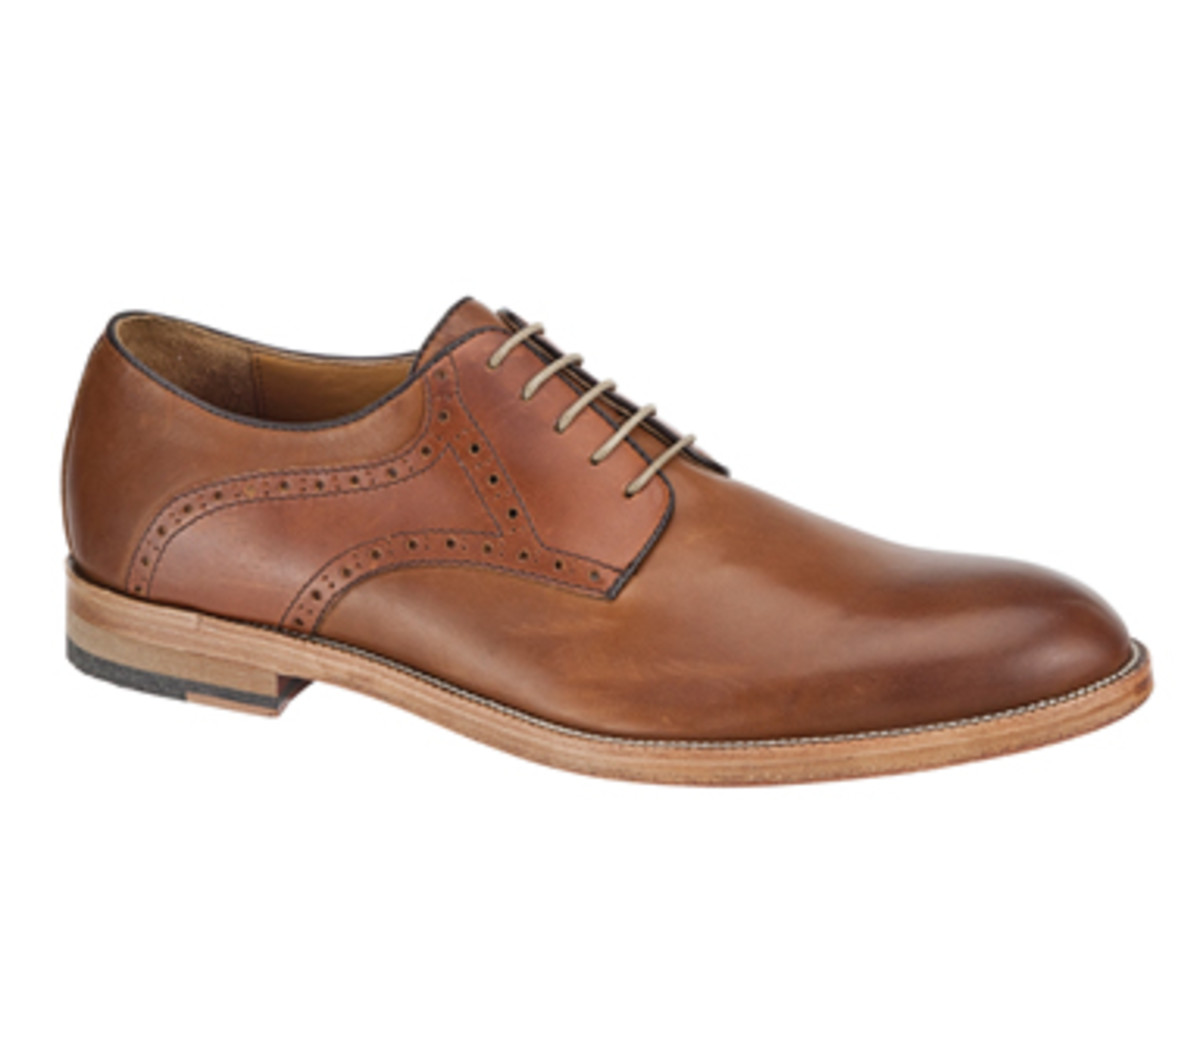 How to Wear Oxford Shoes - Men's Journal